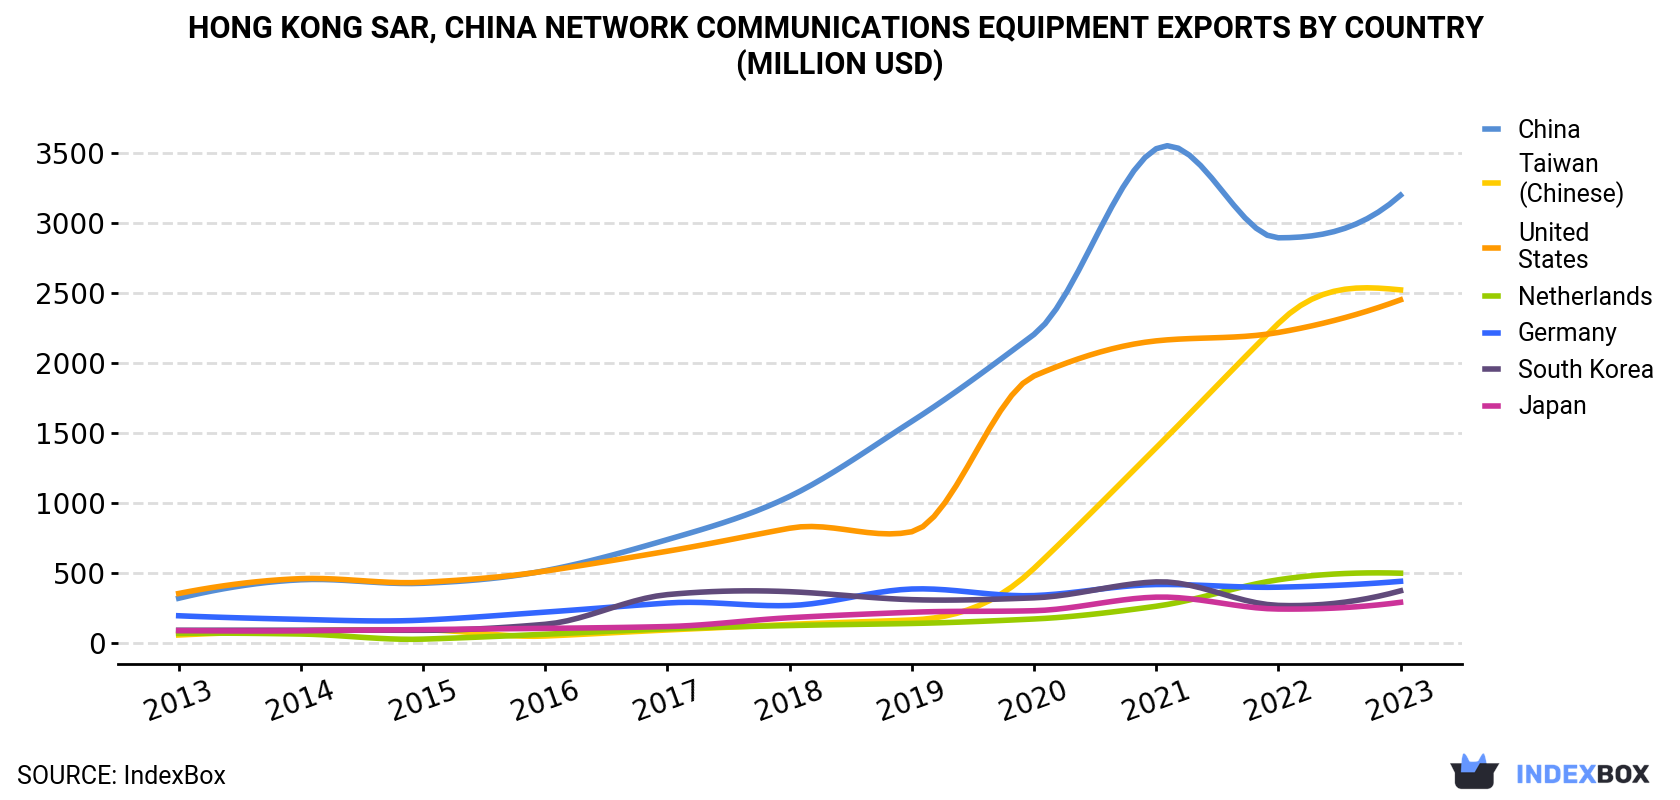 Hong Kong Network Communications Equipment Exports By Country (Million USD)